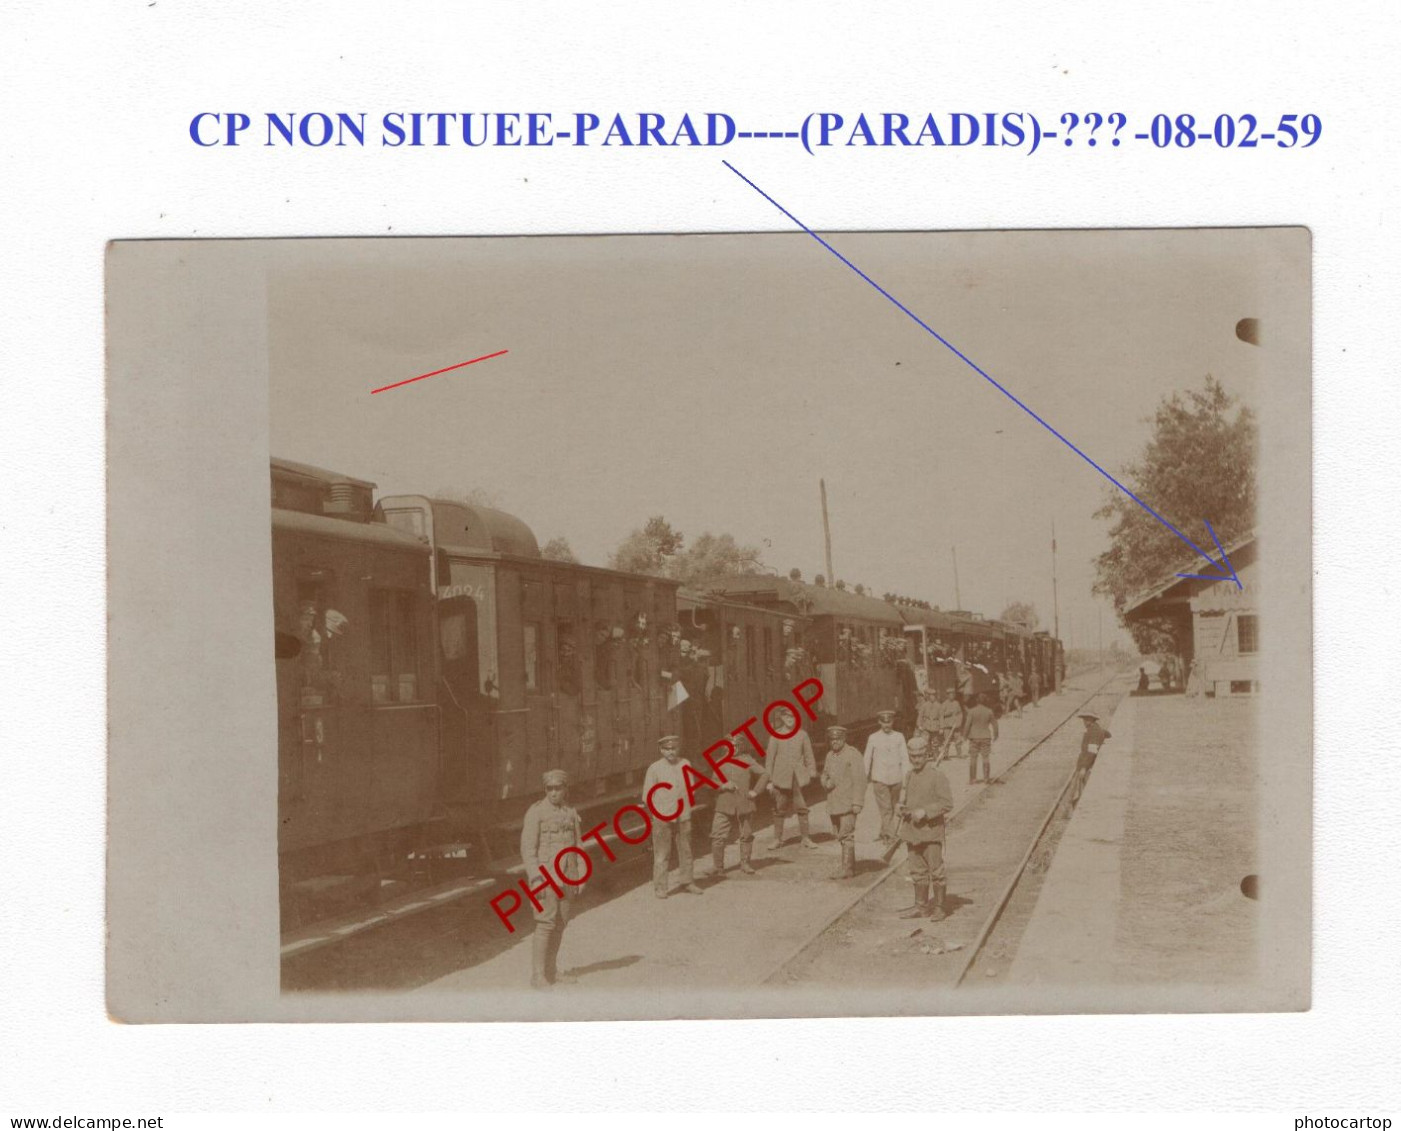 GARE-TRAIN-PARADIS-??-02-08-59-CP NON SITUEE-CARTE PHOTO Allemande-GUERRE 14-18-1 WK-MILITARIA-France - Stations With Trains